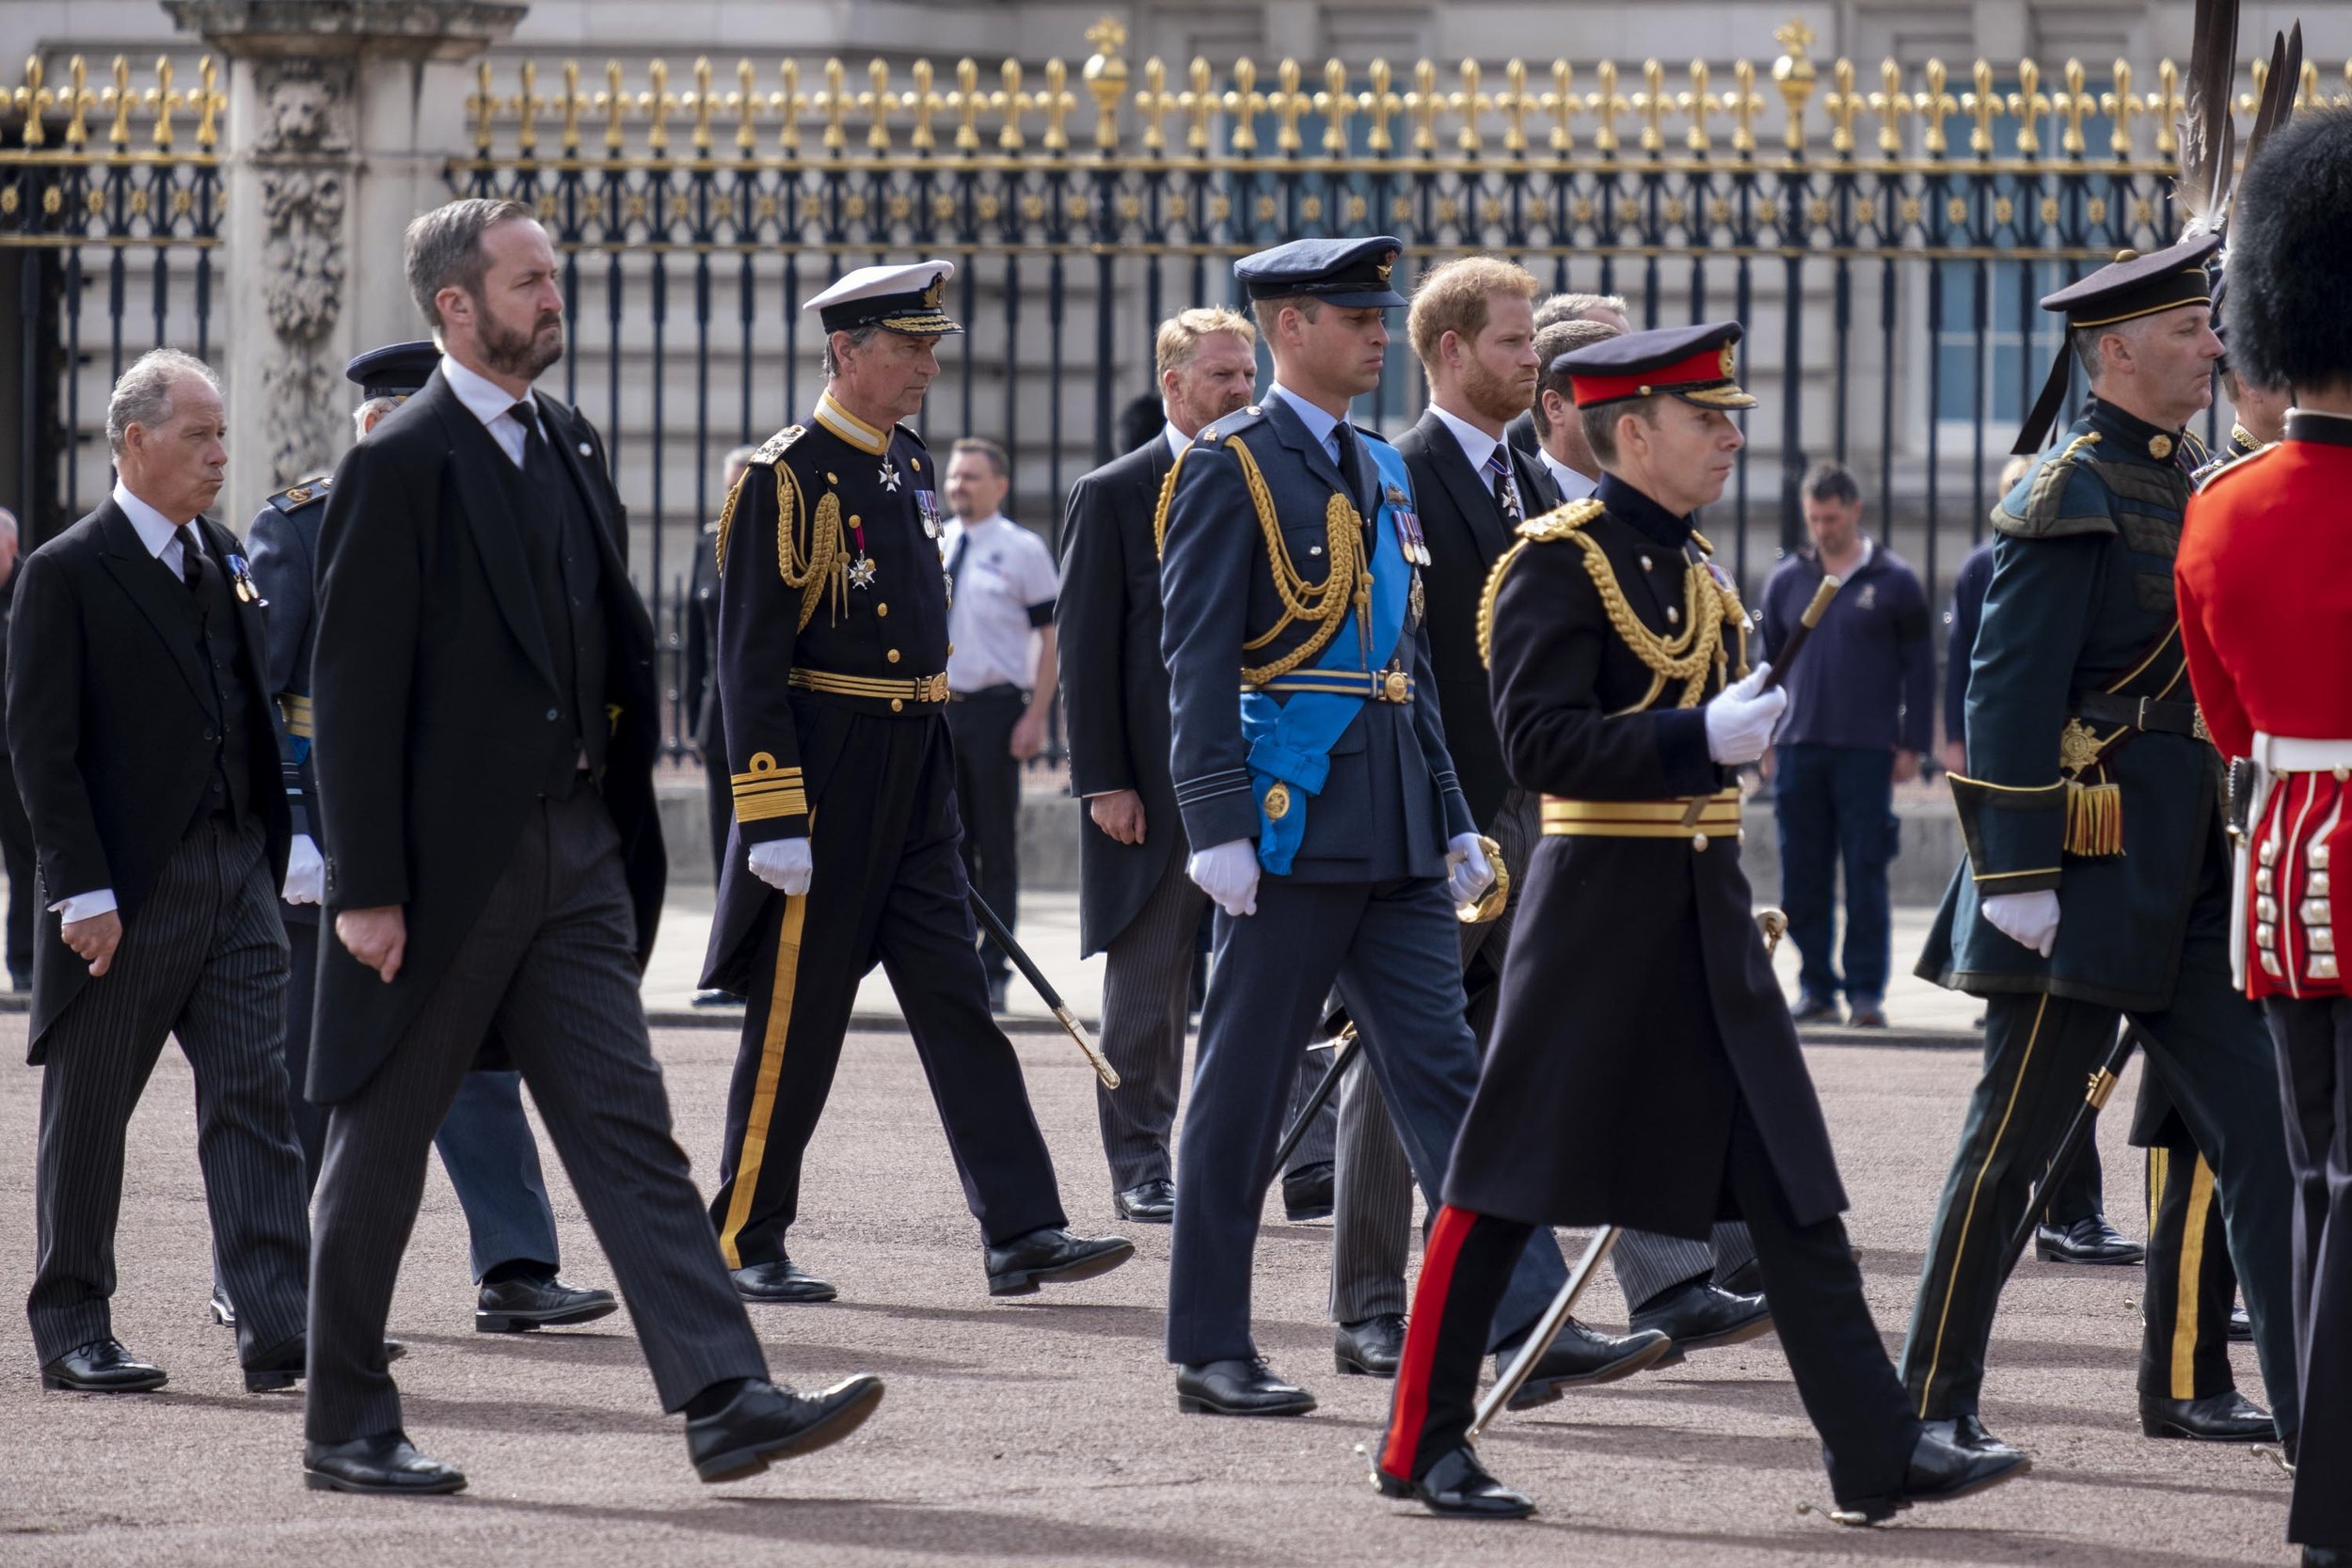  Prince of Wales and Duke of Sussex walk behind the State Gun Carriage. 